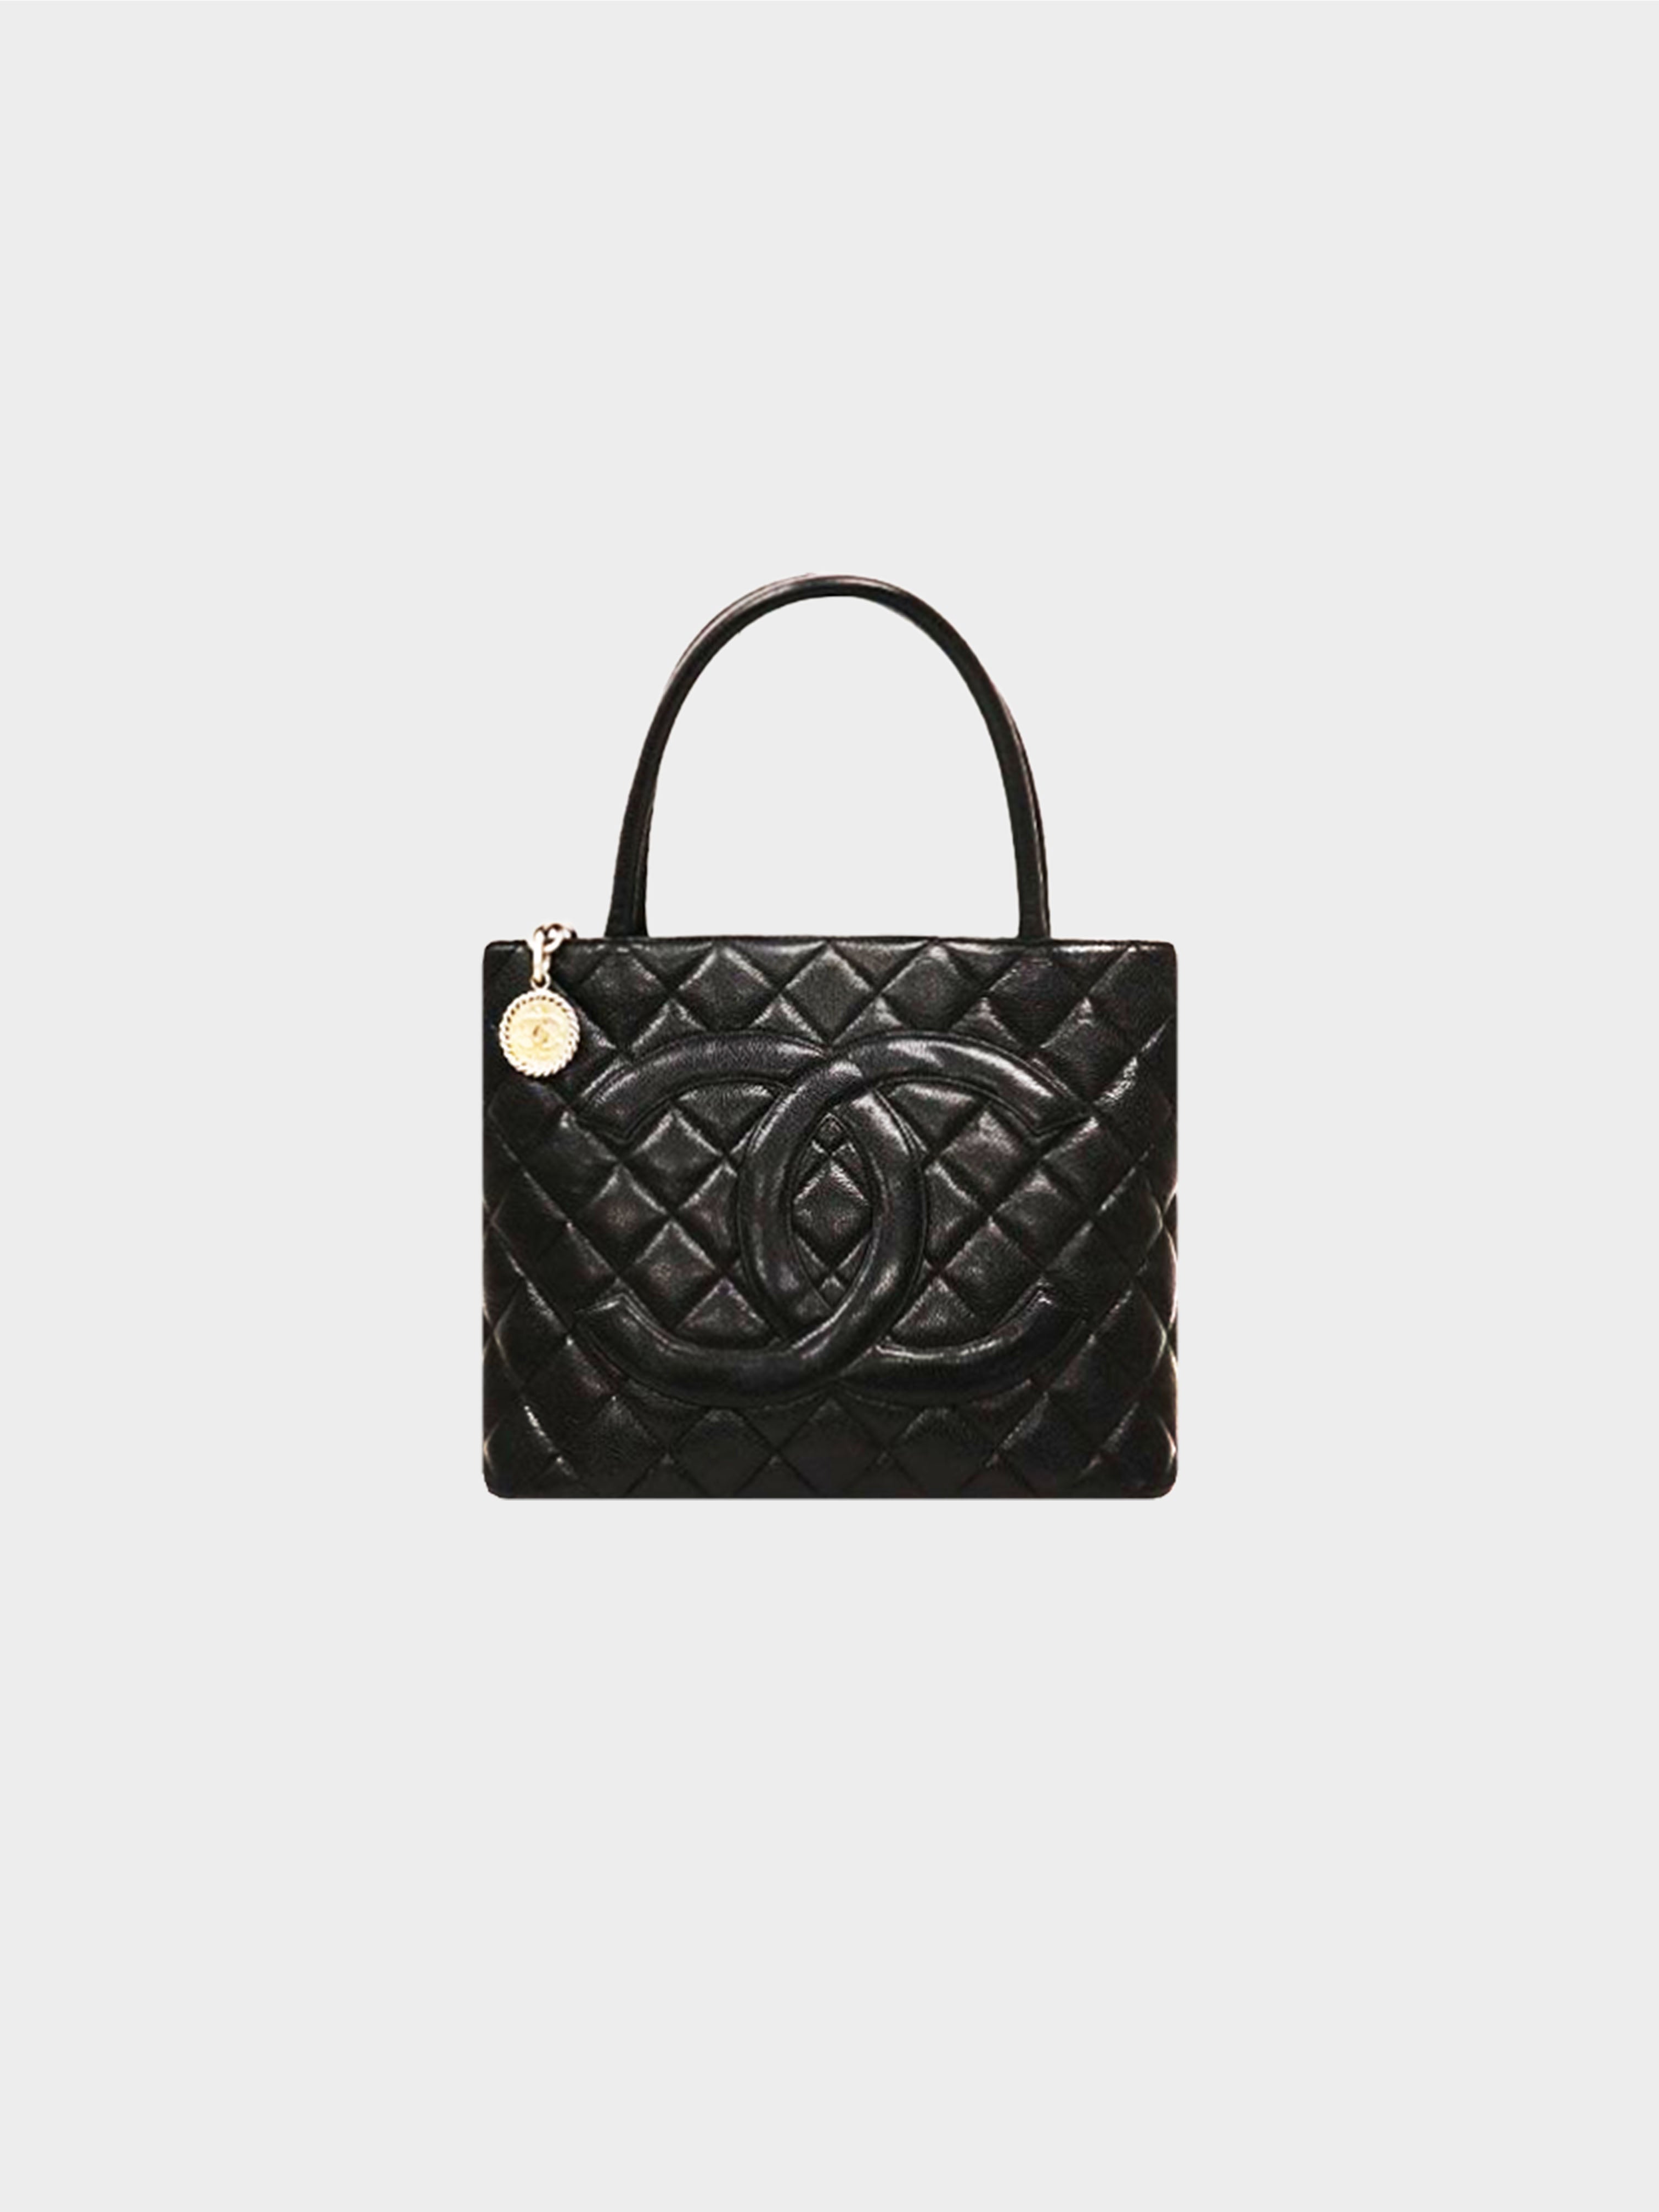 Affordable Chanel! Chanel Medallion Tote Reveal 